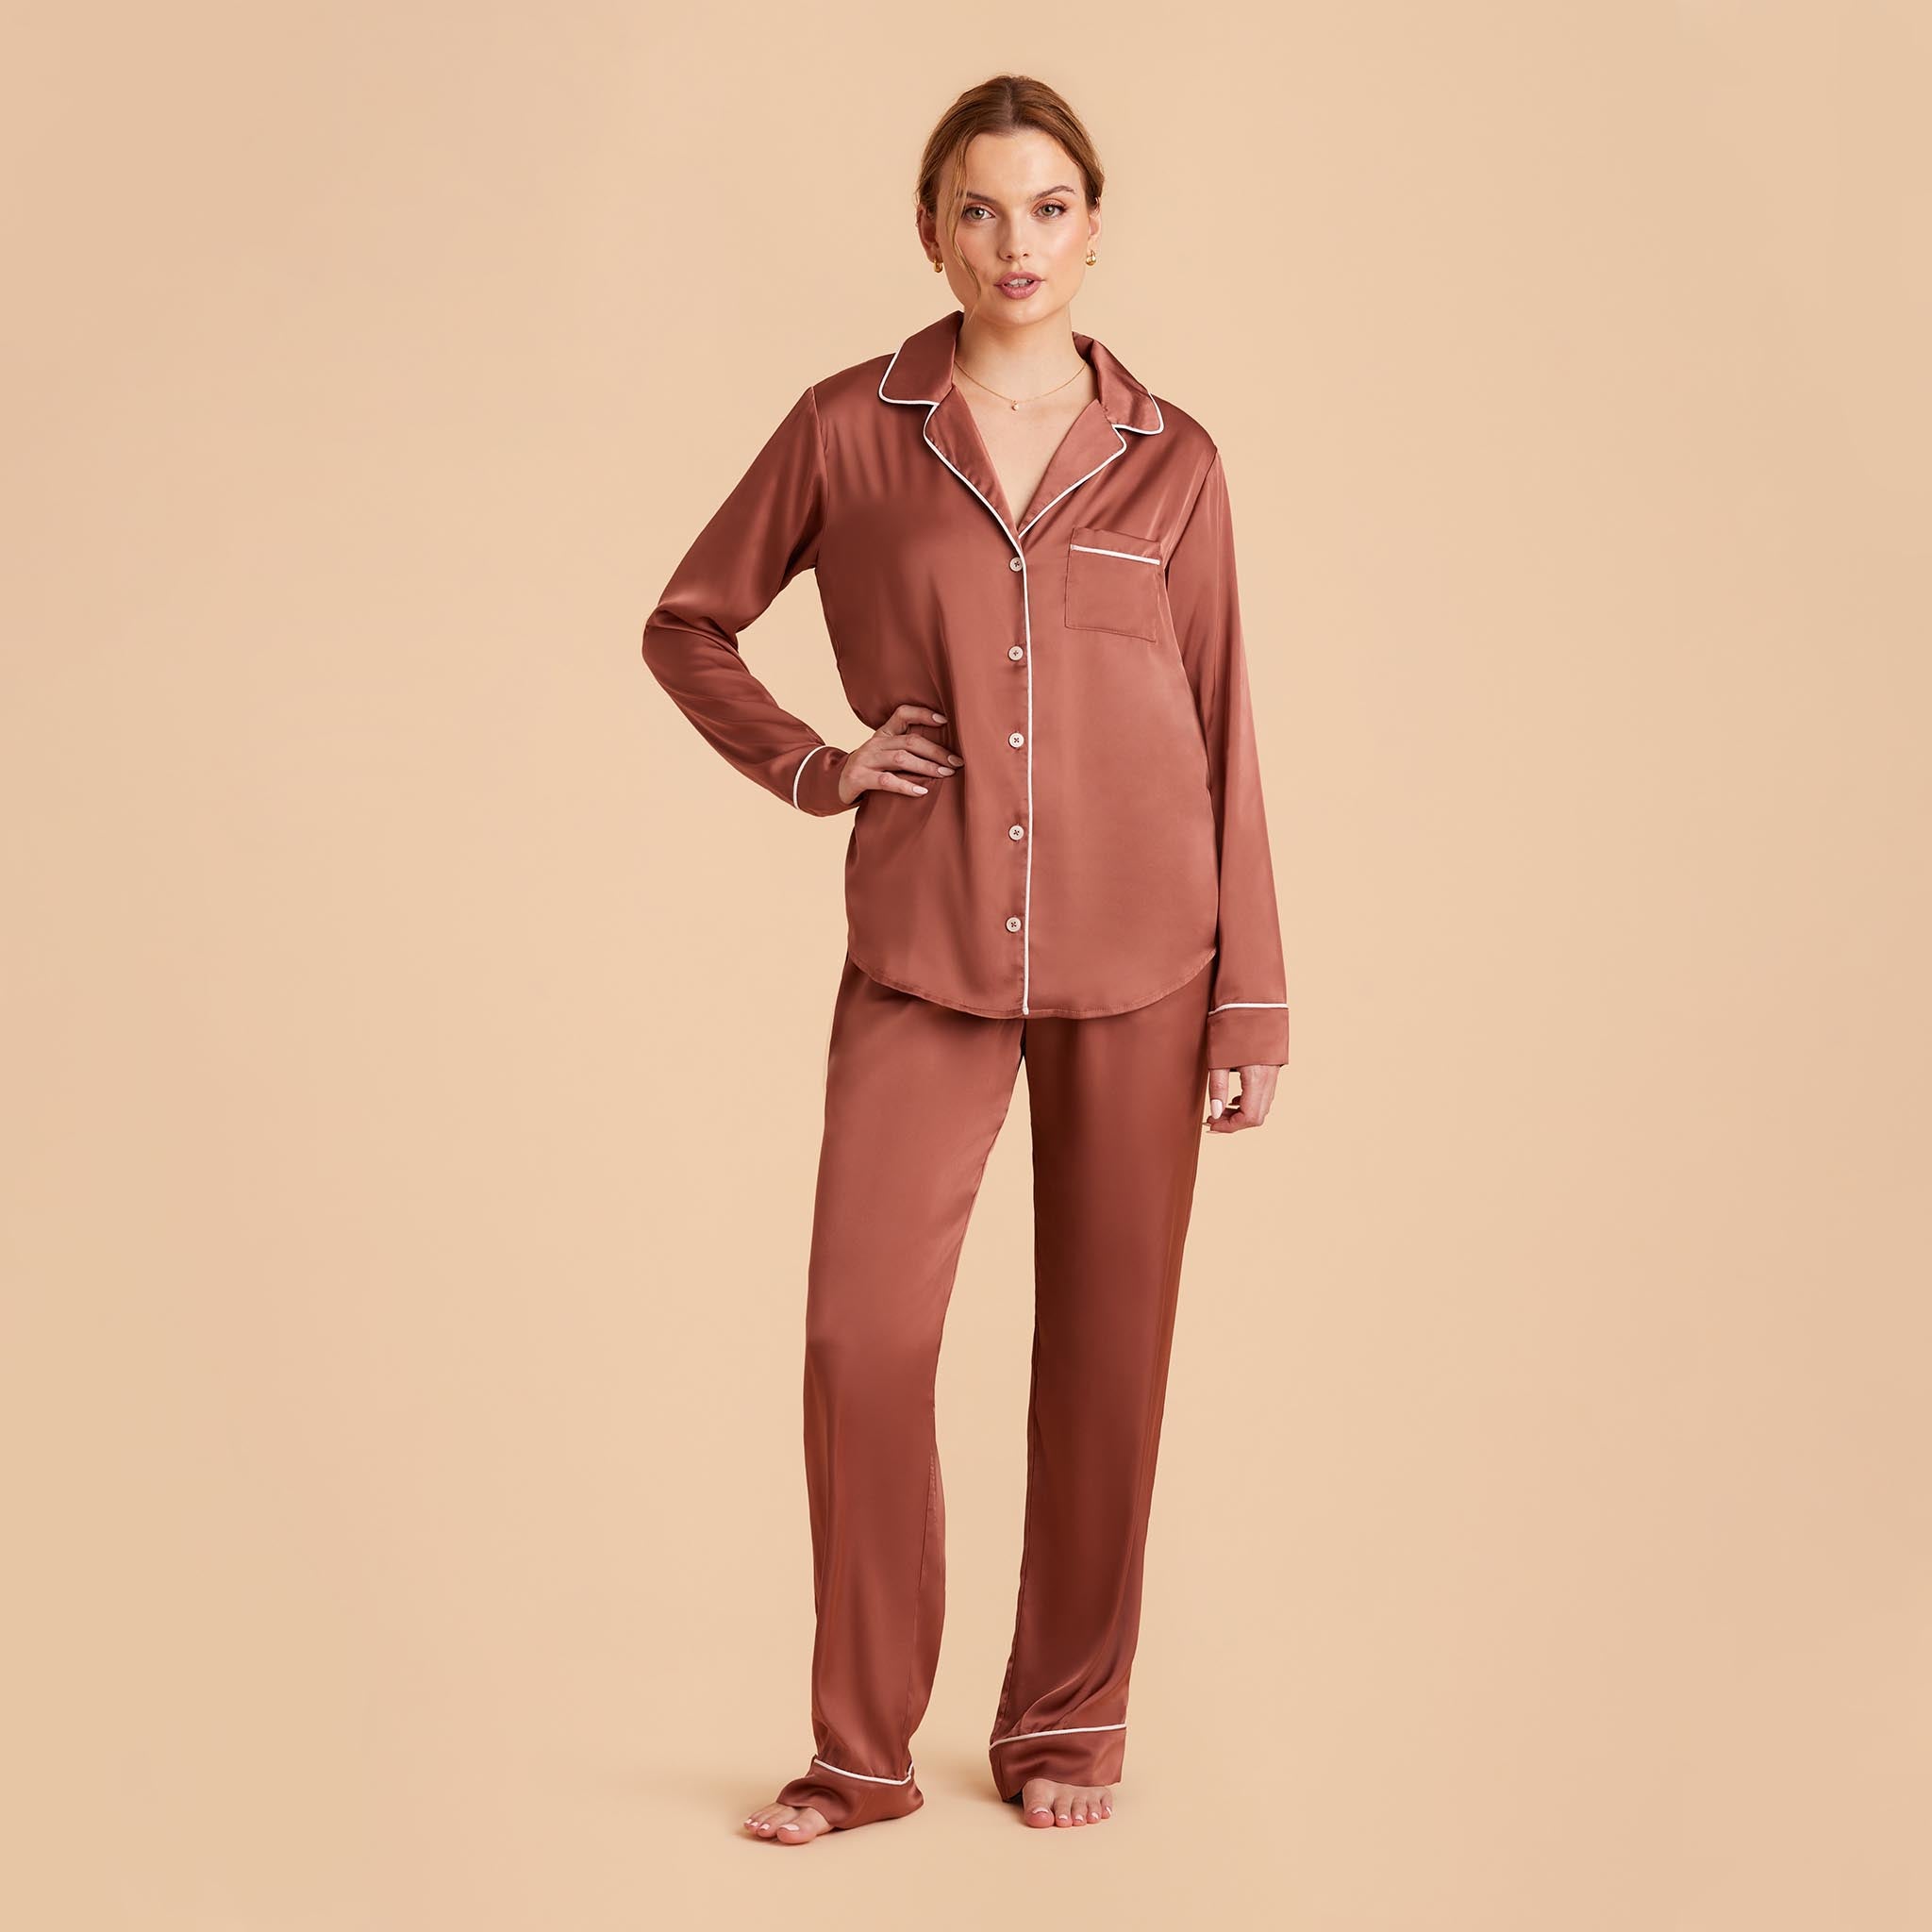 Jonny Satin Pants Bridesmaid Pajamas With White Piping in desert rose, front view